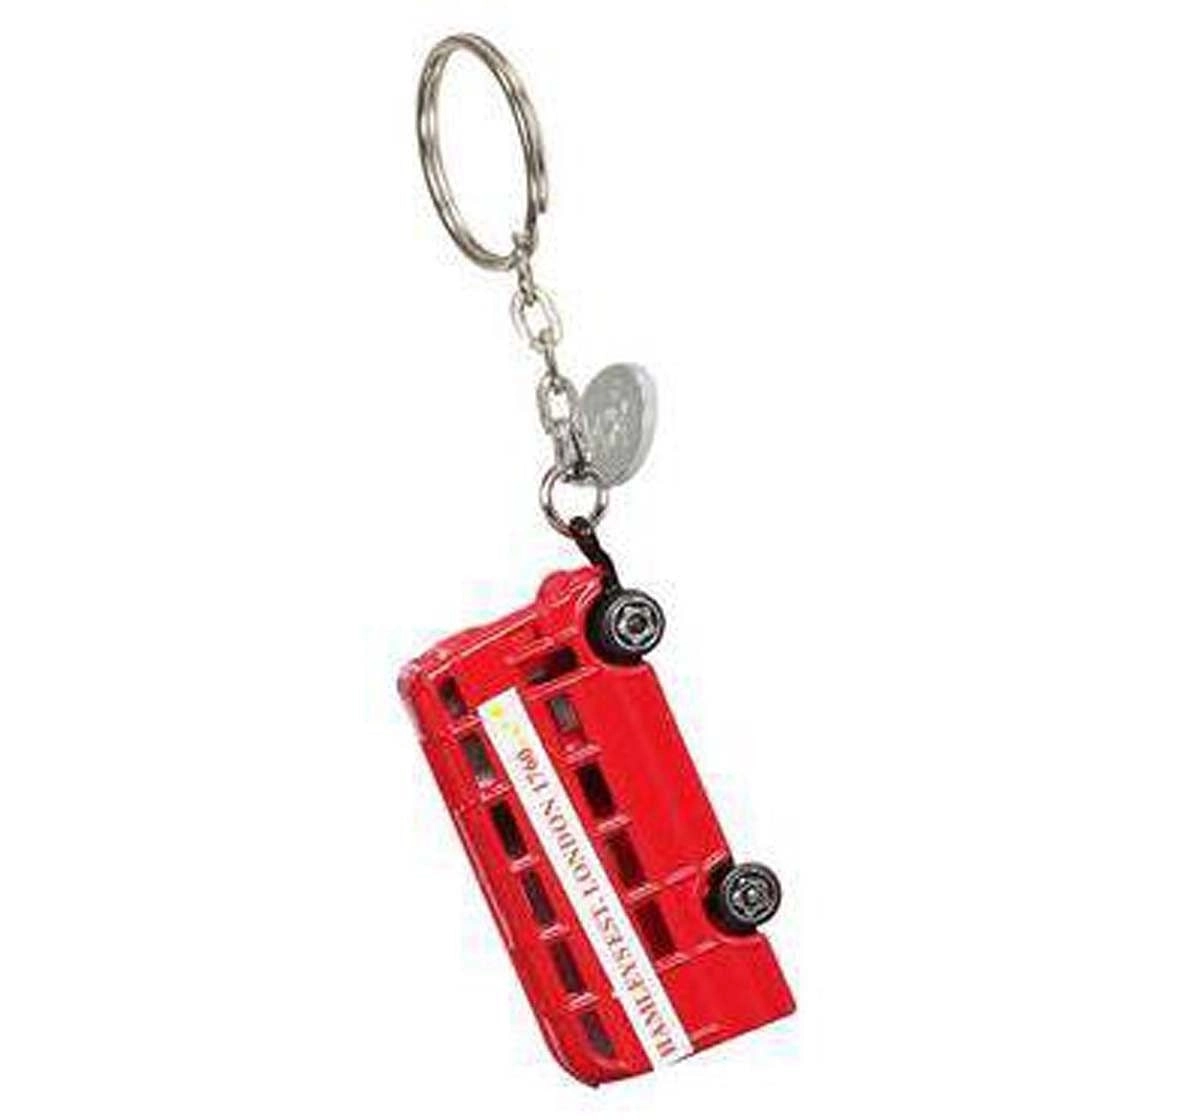 Hamleys London Bus Keychain -Red Plush Accessories for Kids age 12M+ - 6 Cm